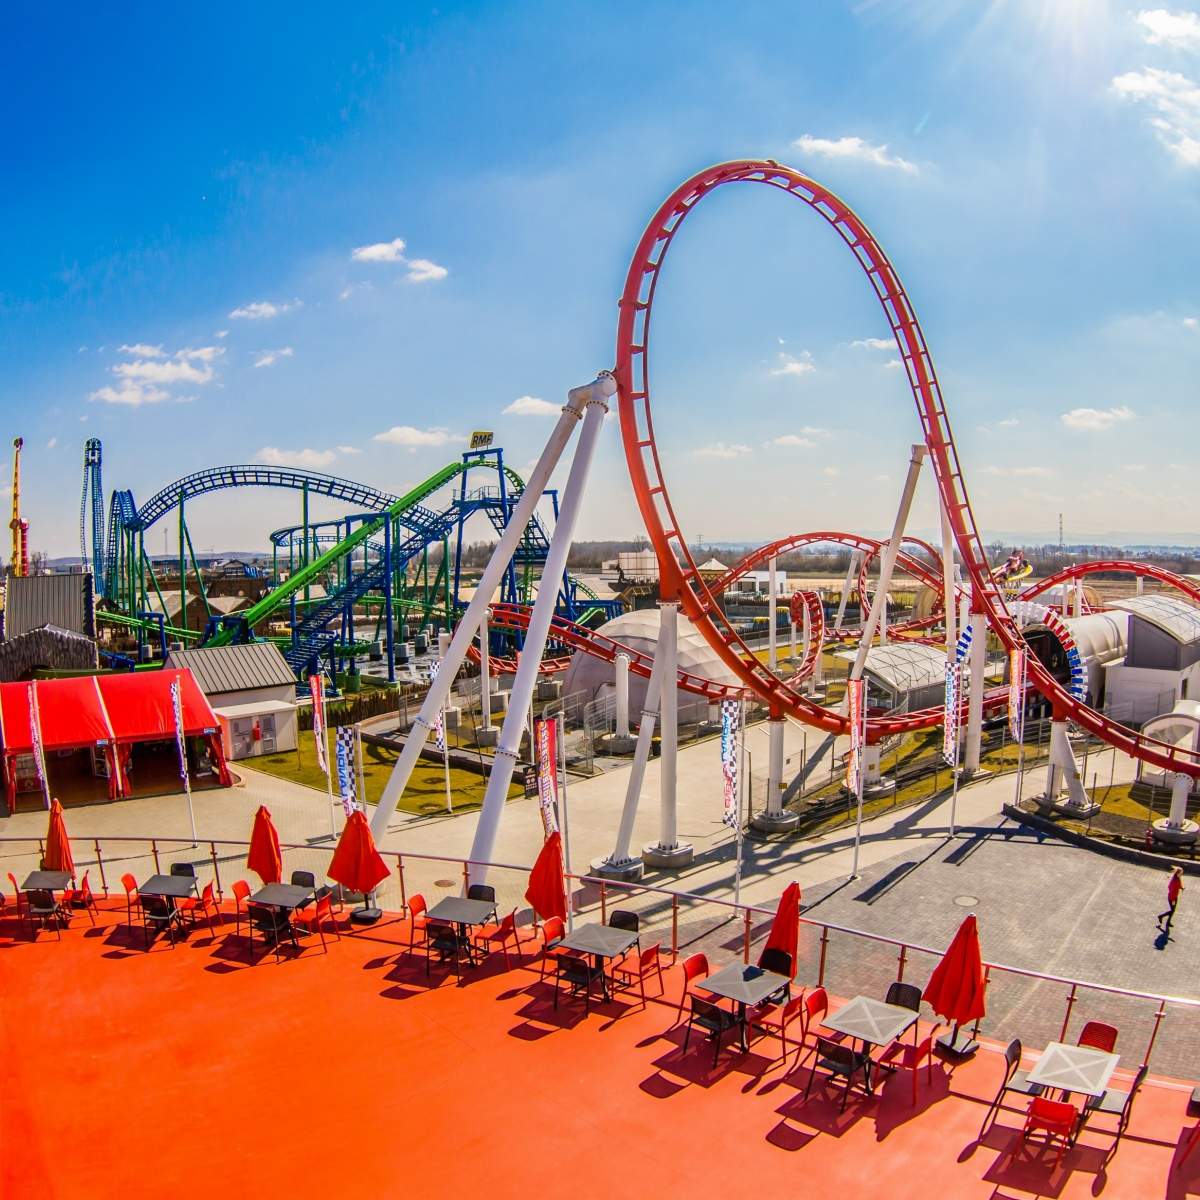 Energylandia: Tickets & Tours to the Largest Theme Park in Poland